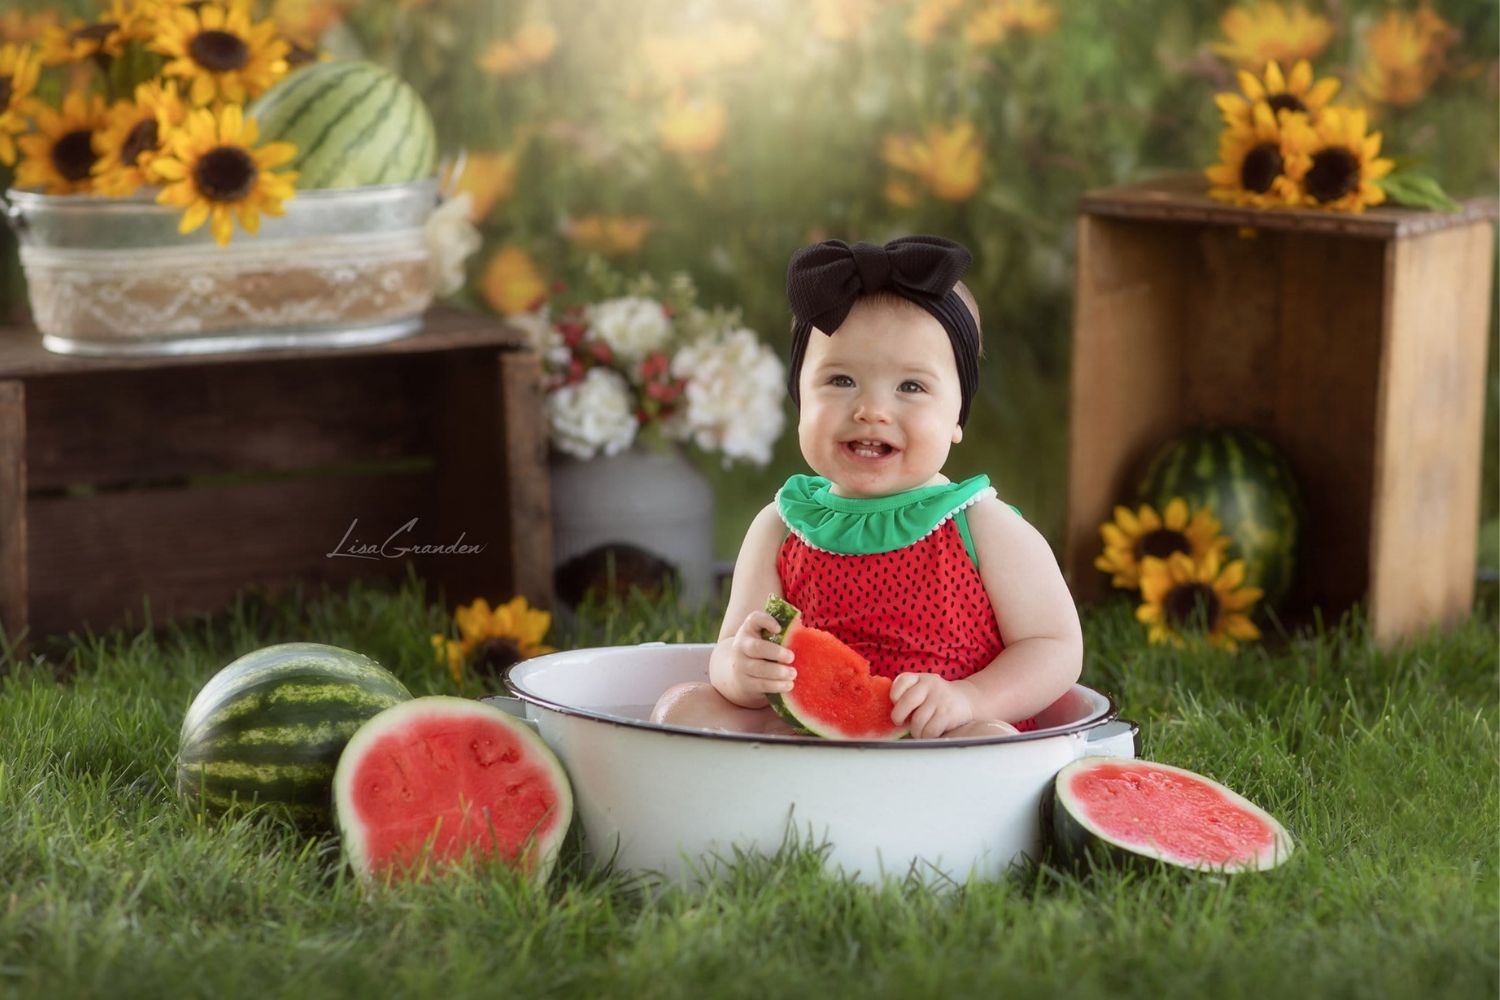 photo of baby eating watermelon